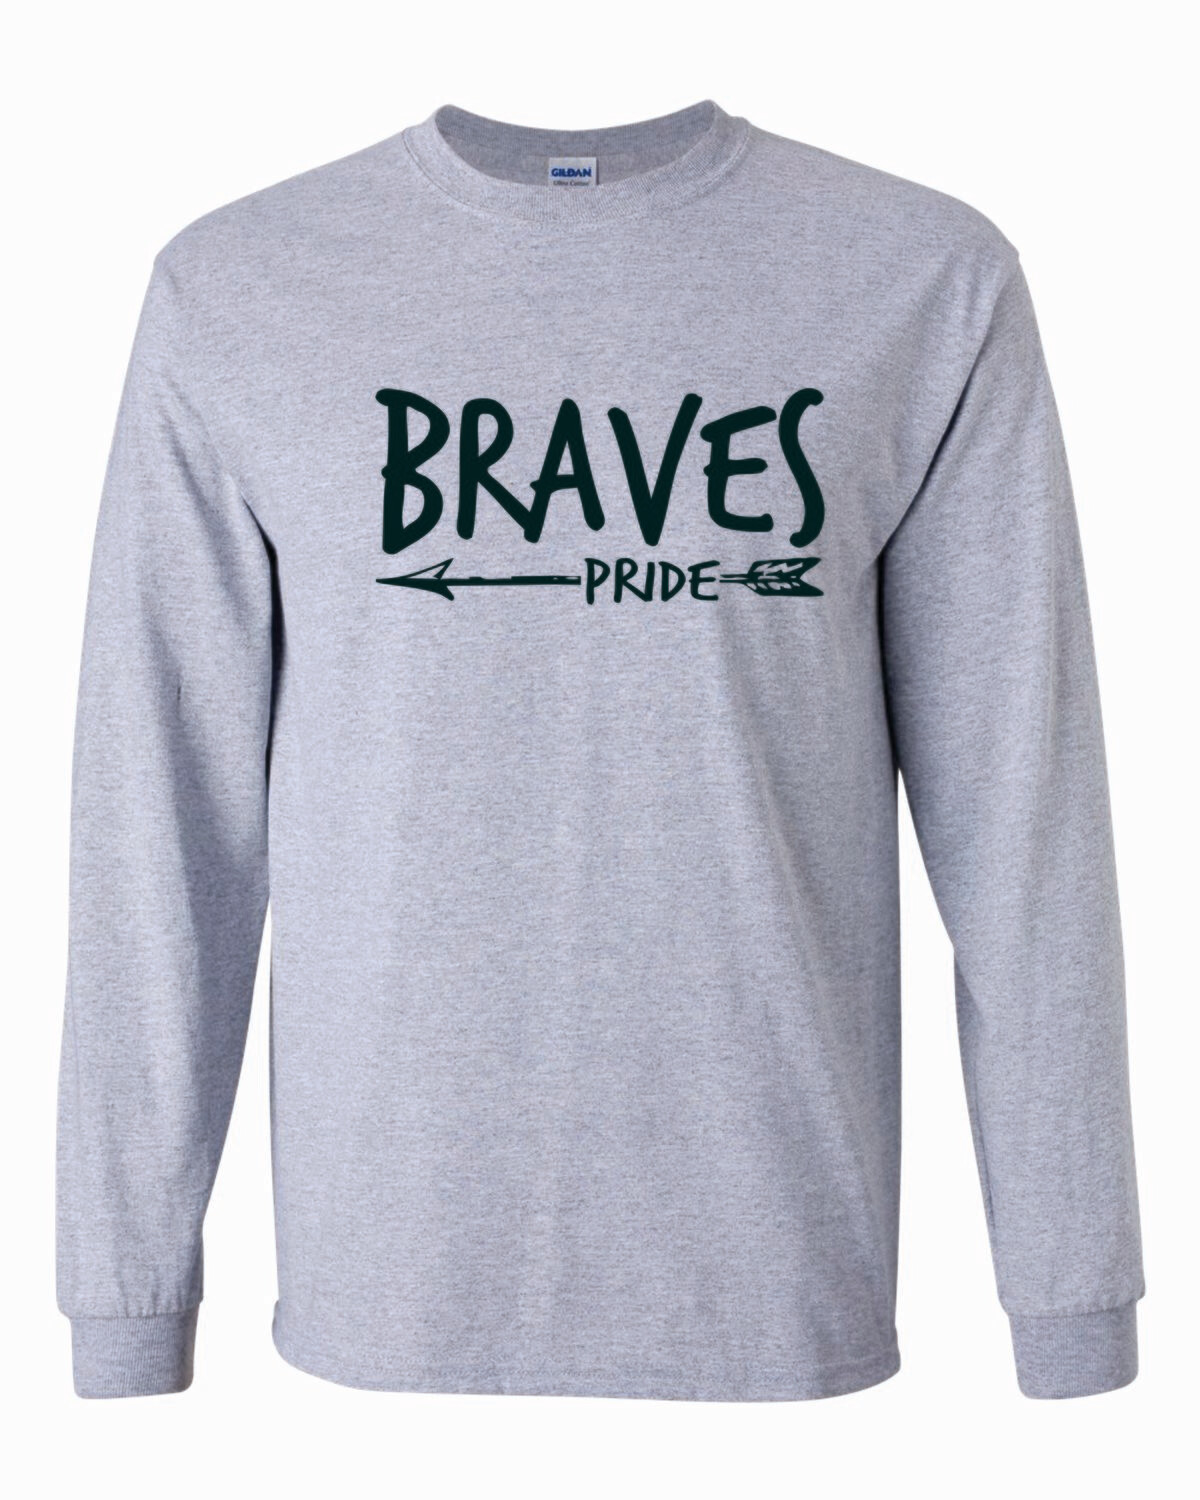 BRAVES PRIDE Long Sleeve T-shirt, 4 colors available